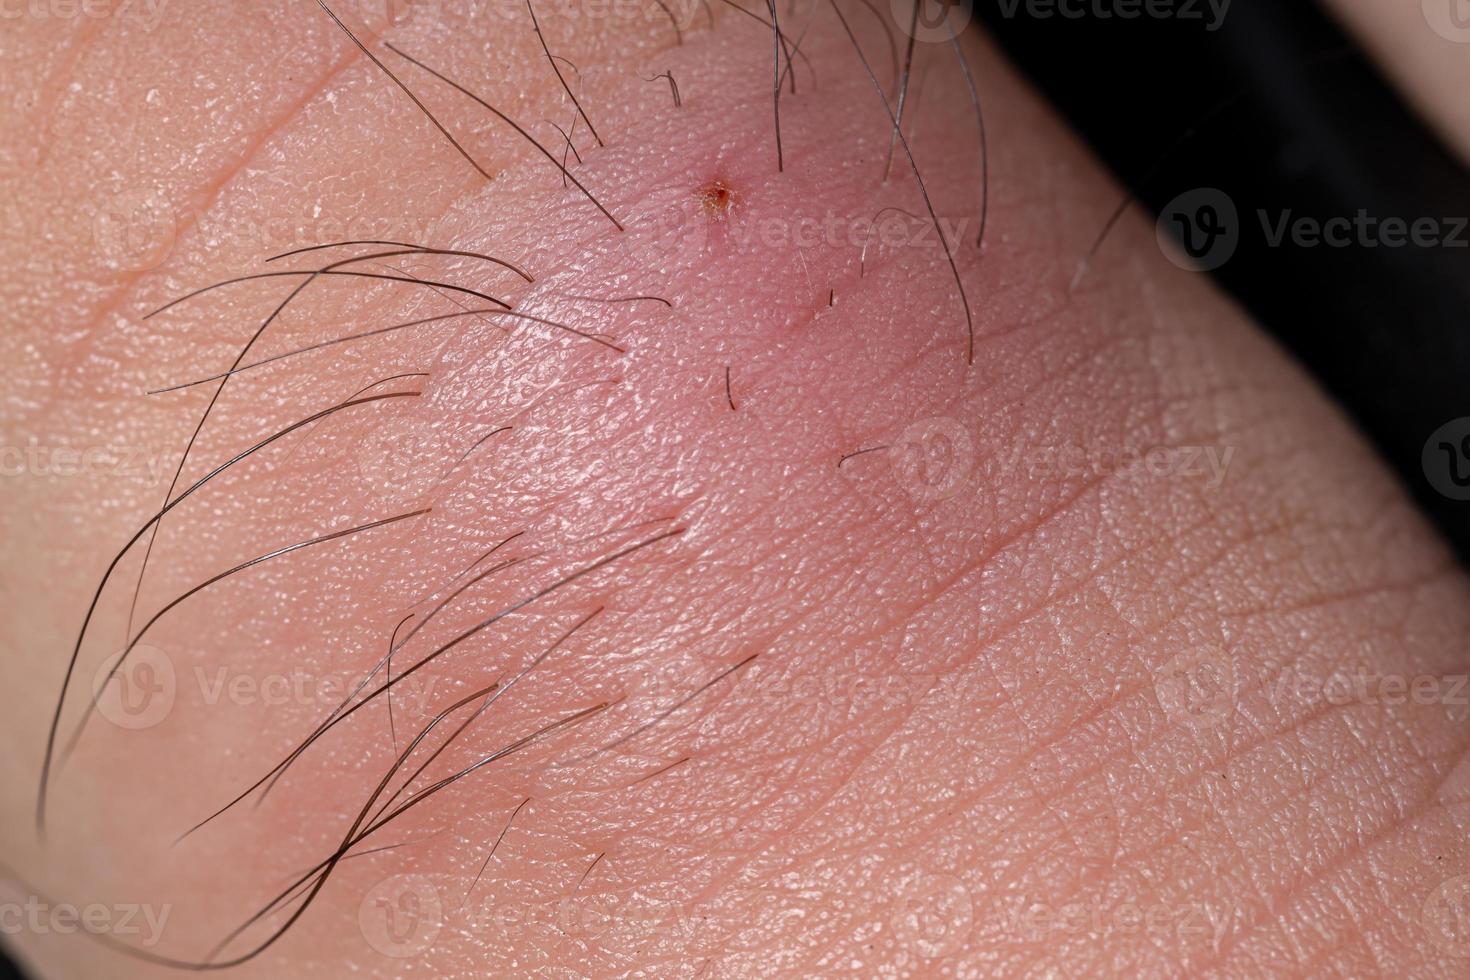 Inflammation caused by ingrown hair photo